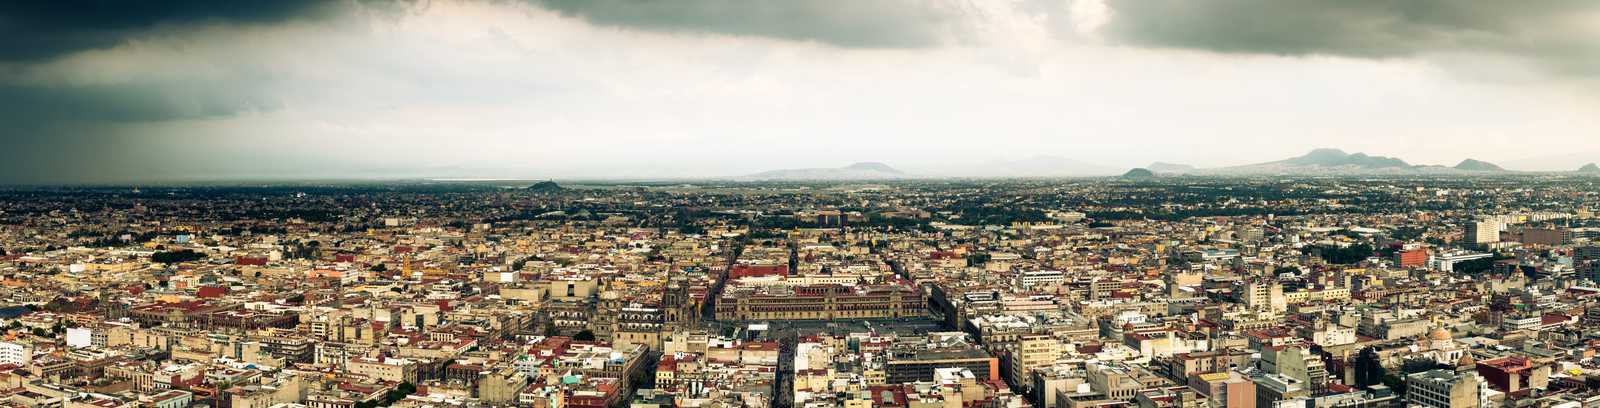 A panorama view over Mexico City